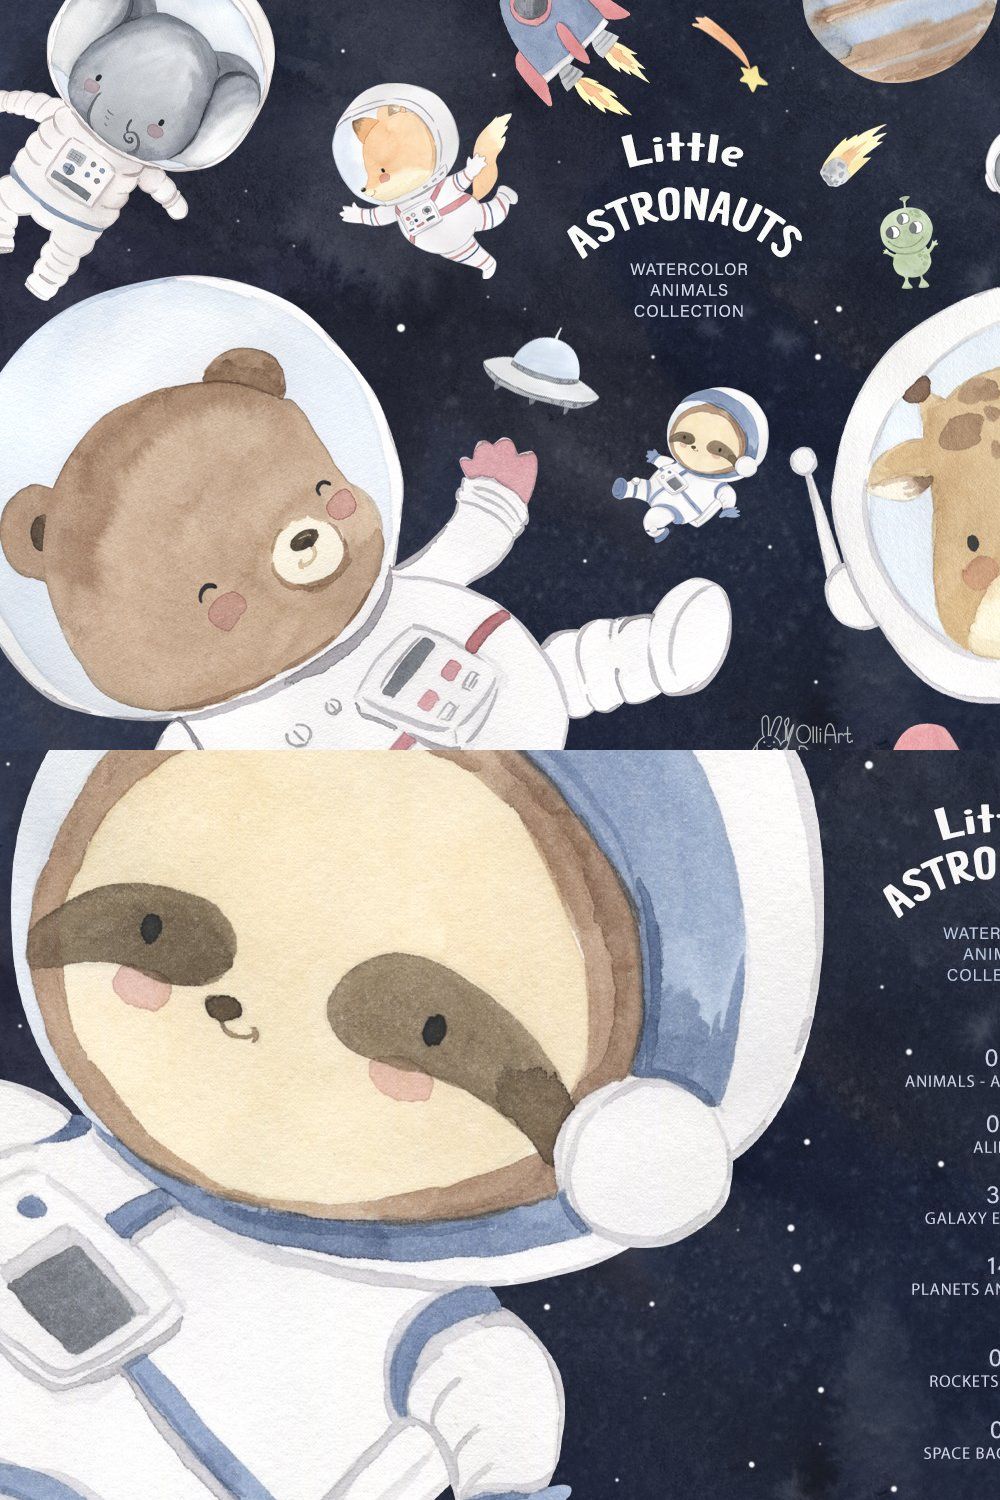 ASTRONAUT clipart. Watercolor animal pinterest preview image.